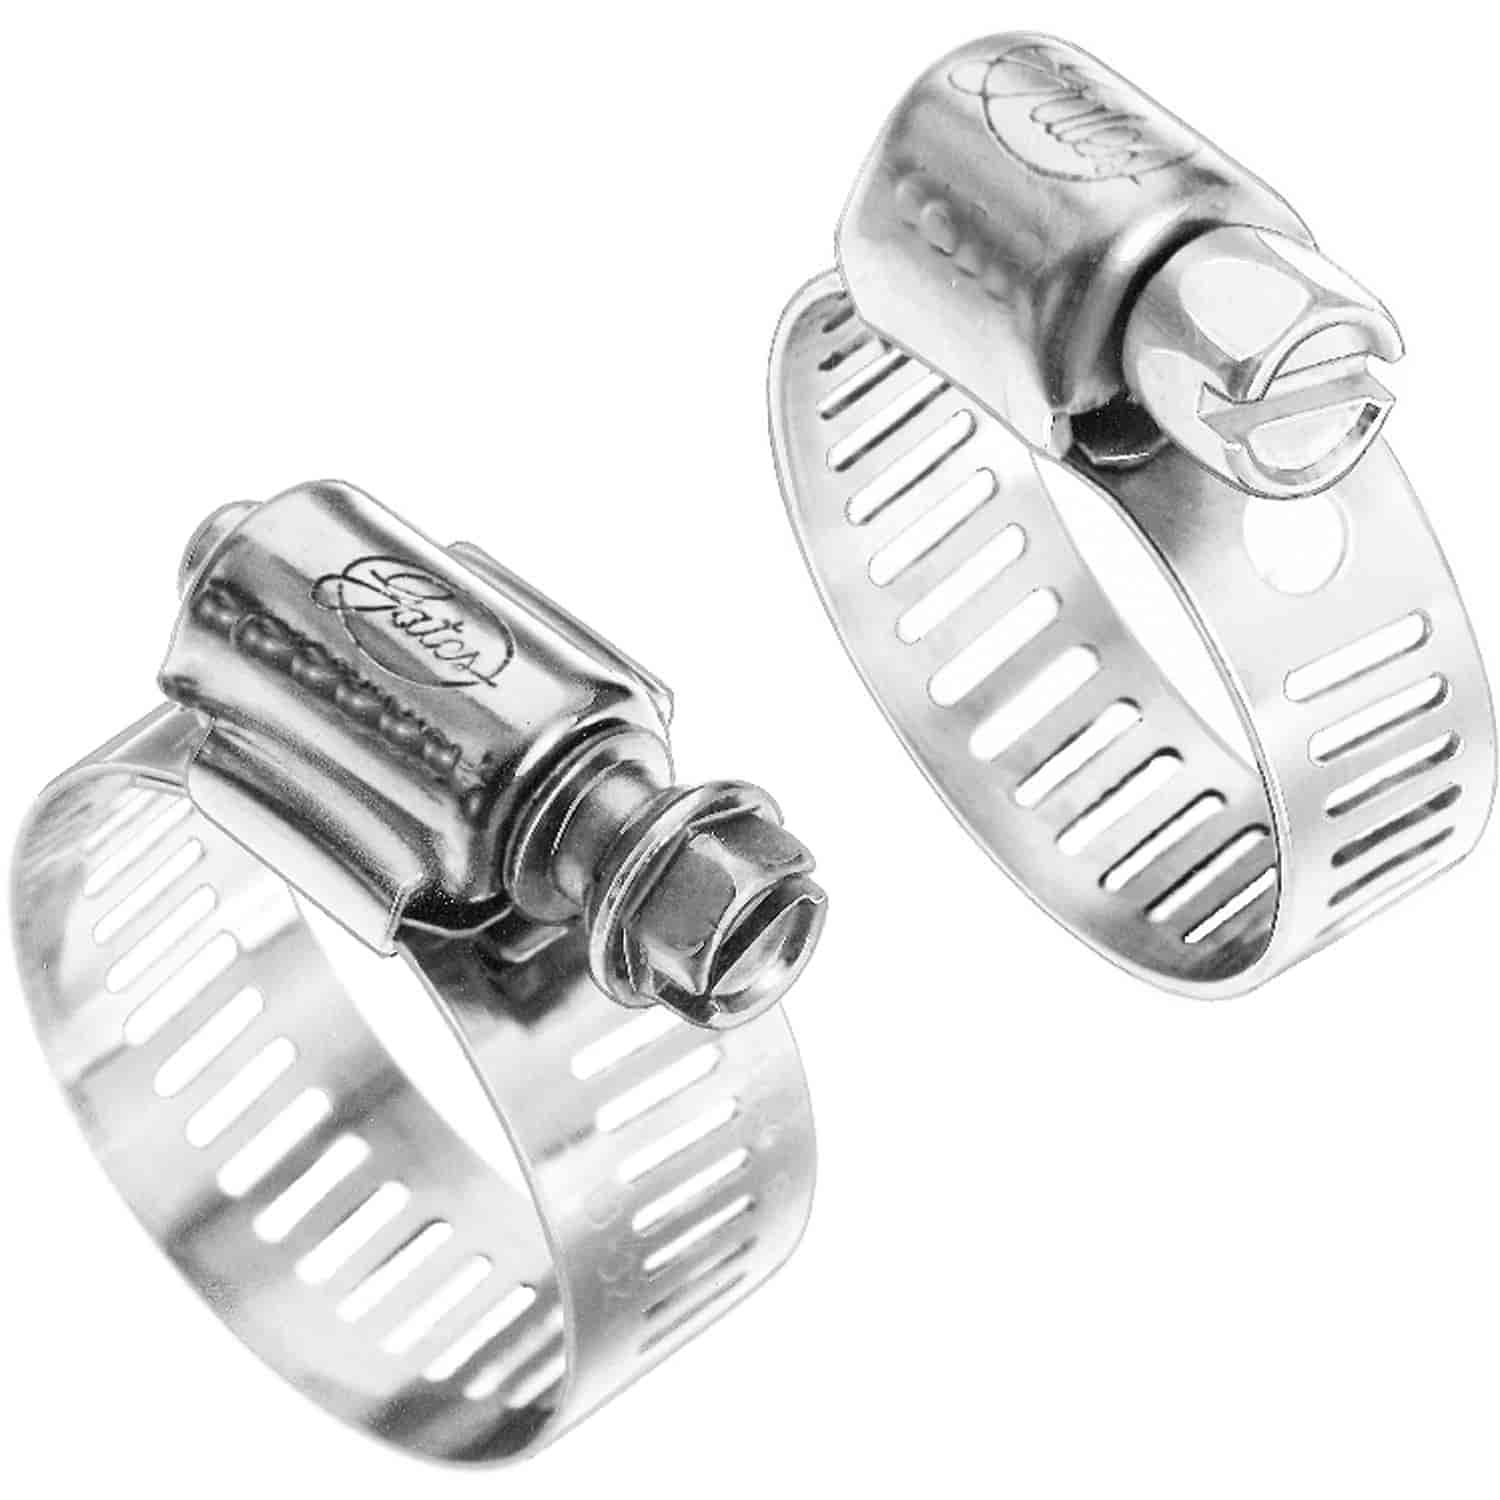 Stainless Steel Hose Clamps Size 1 (.15625" To .5" Hose)